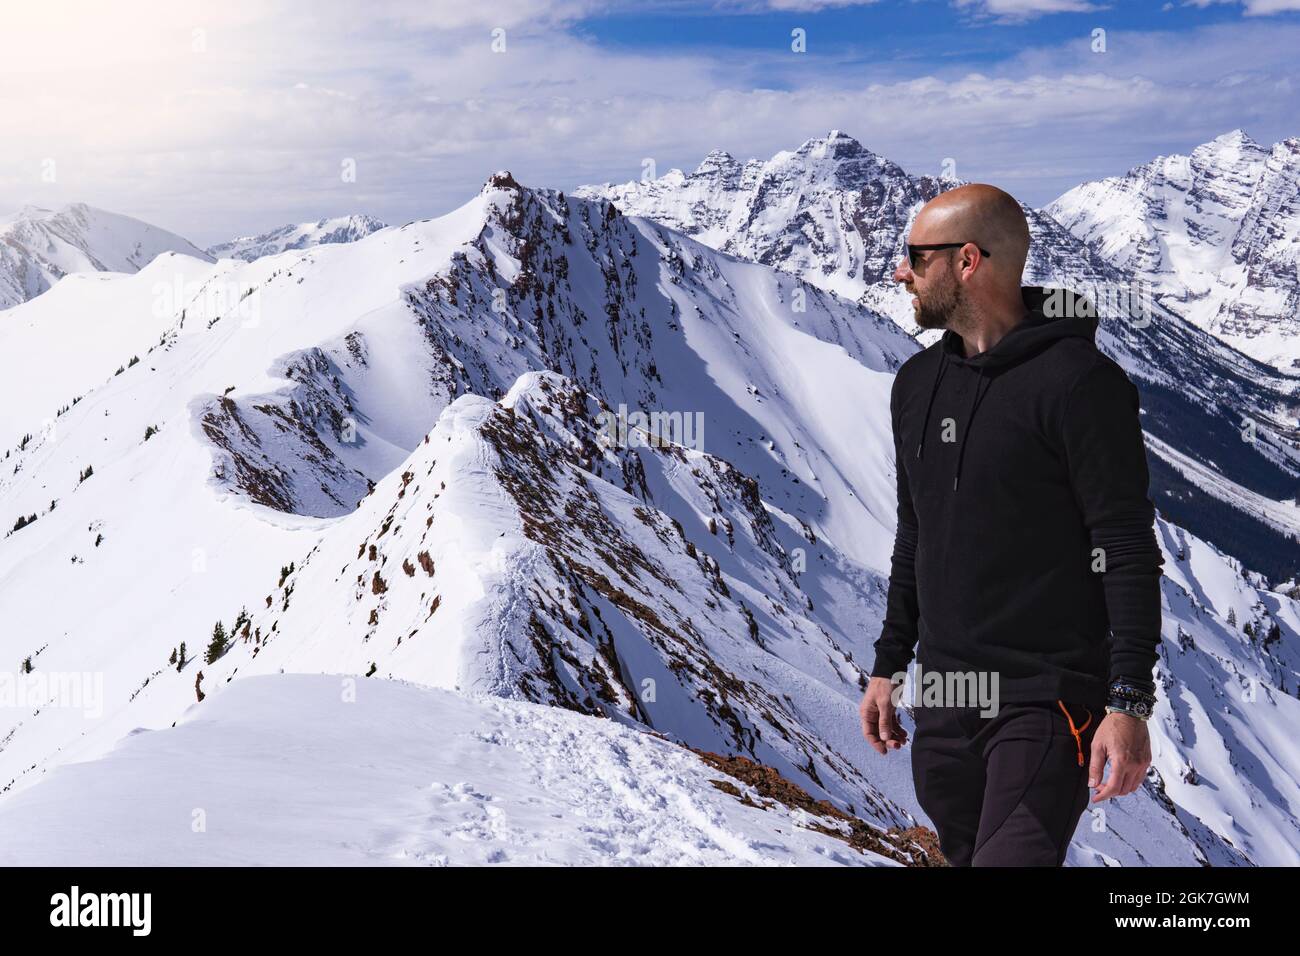 Bald Male Model In Winter Exploration On Snow Covered Mountain Peak Stock Photo